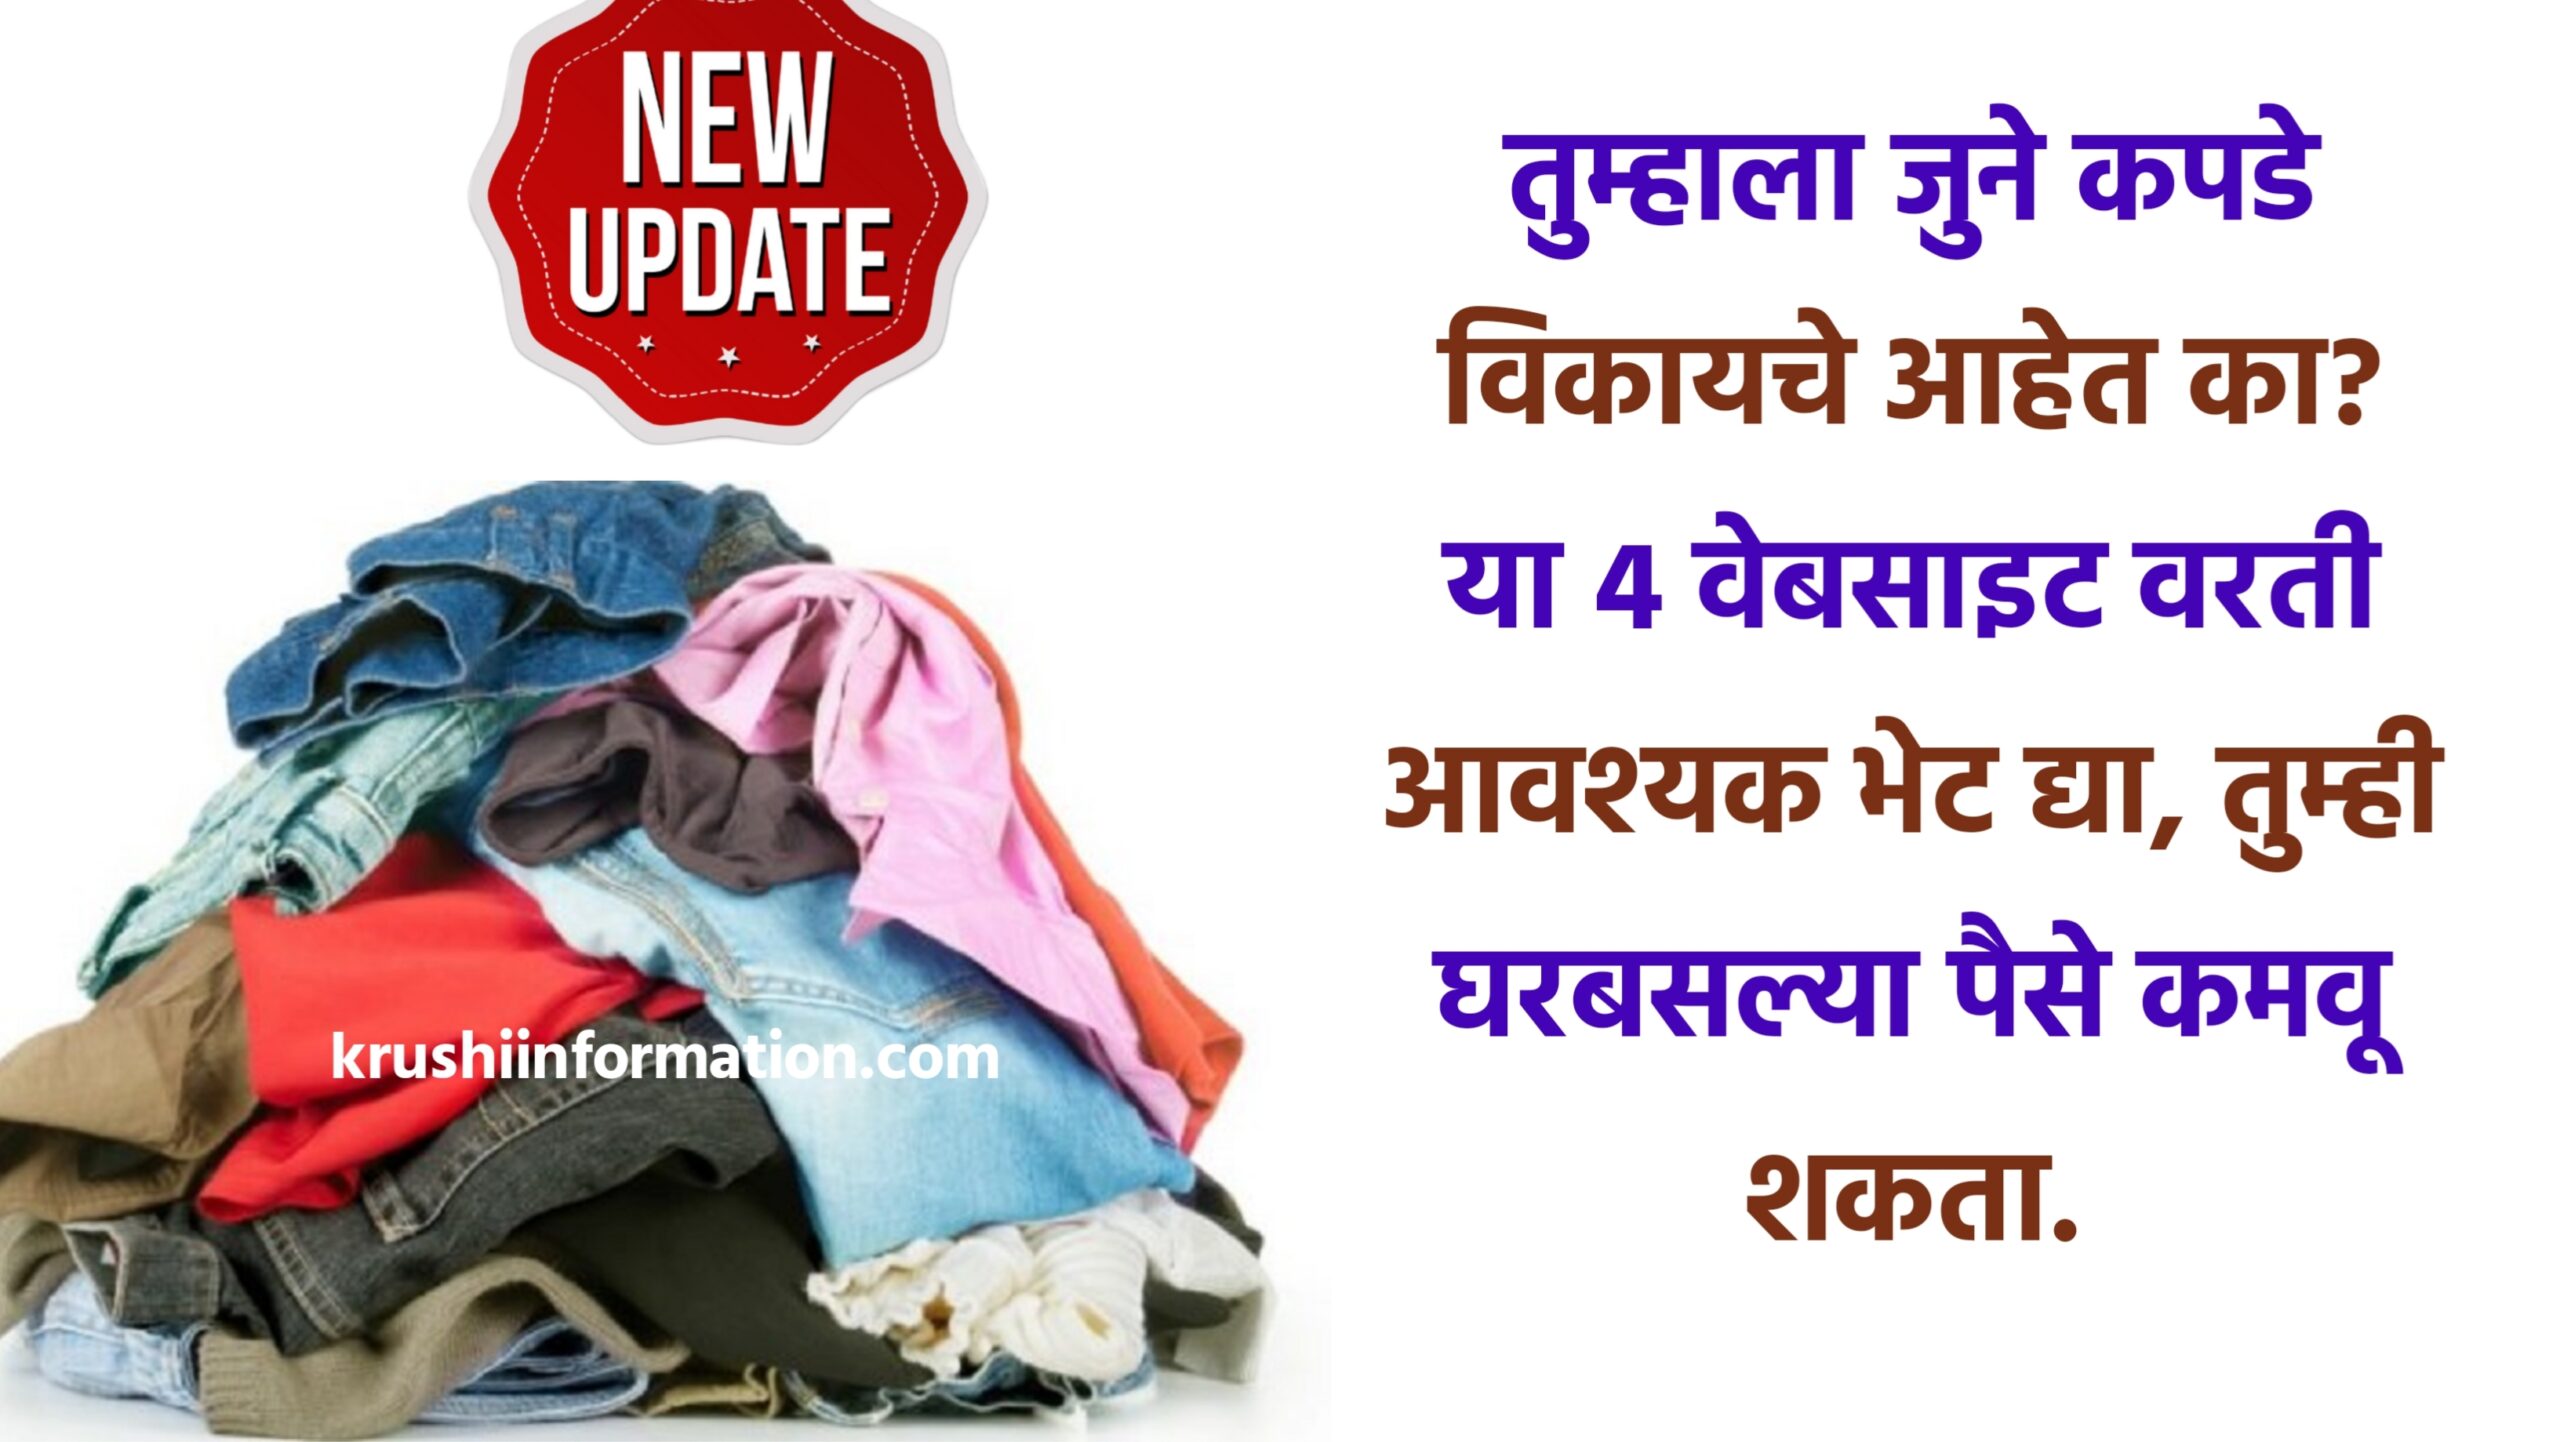 Earn money by selling old clothes